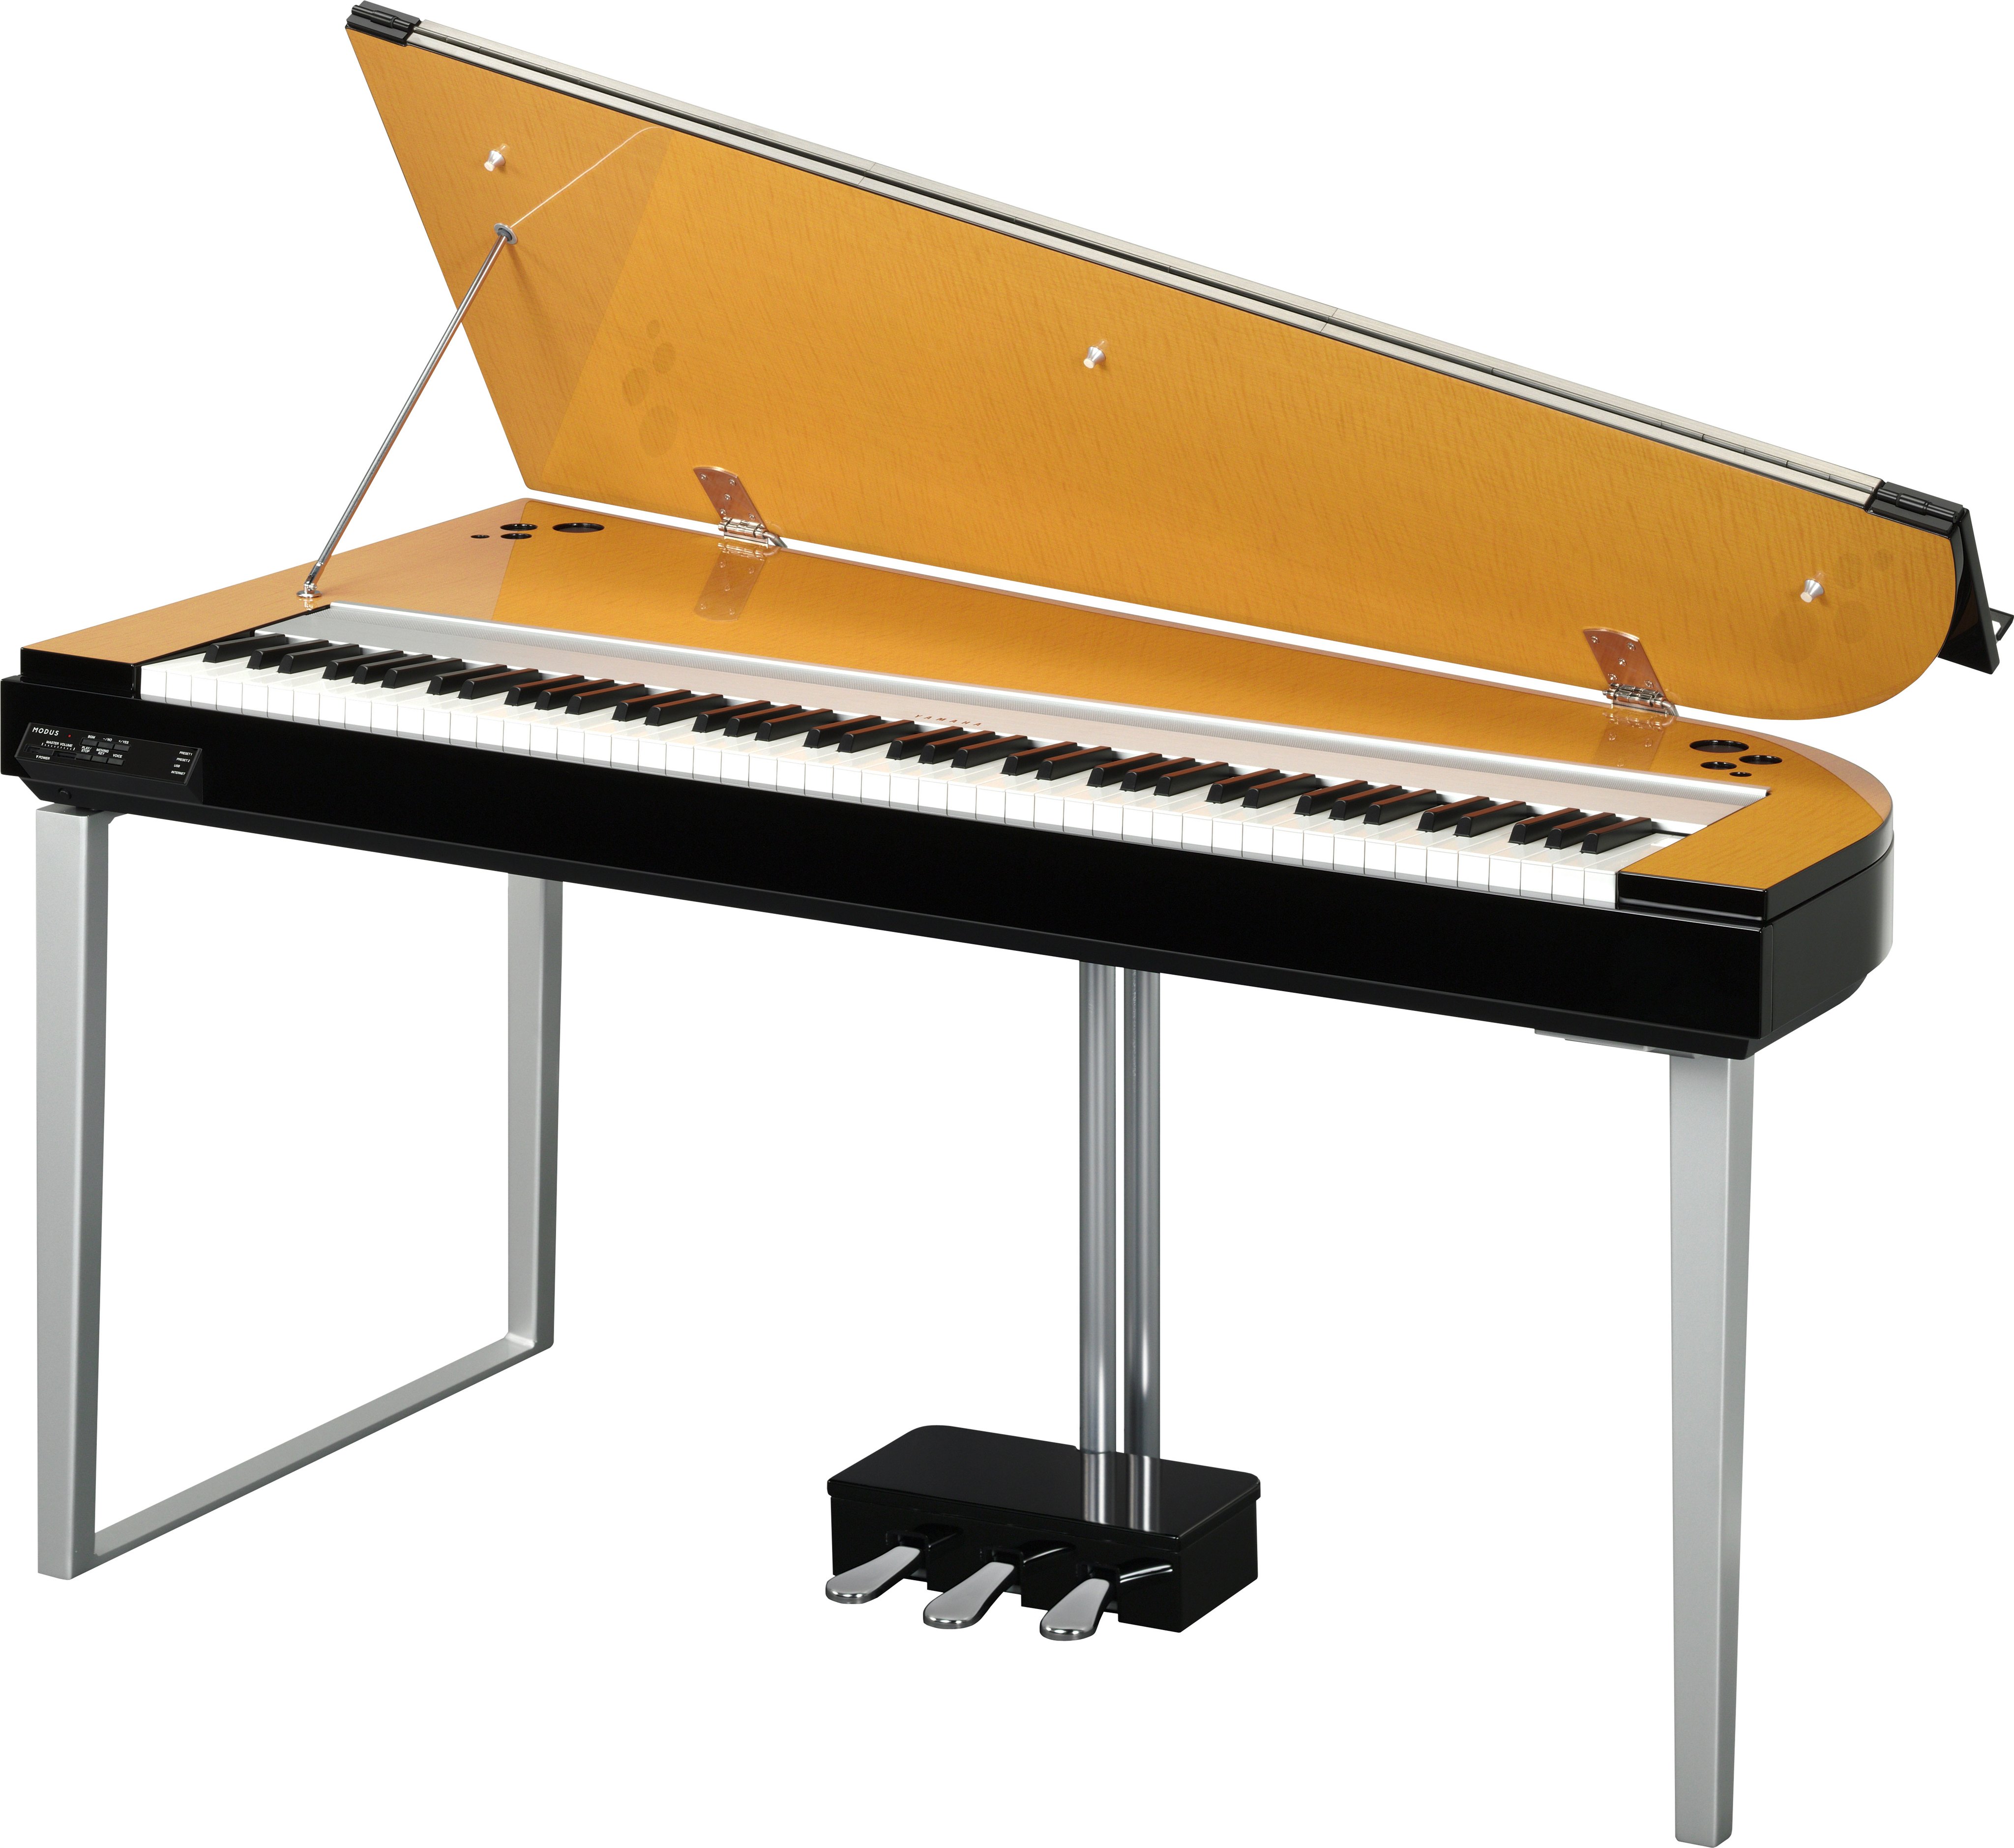 H11 - Overview - MODUS - Pianos - Musical Instruments - Products 